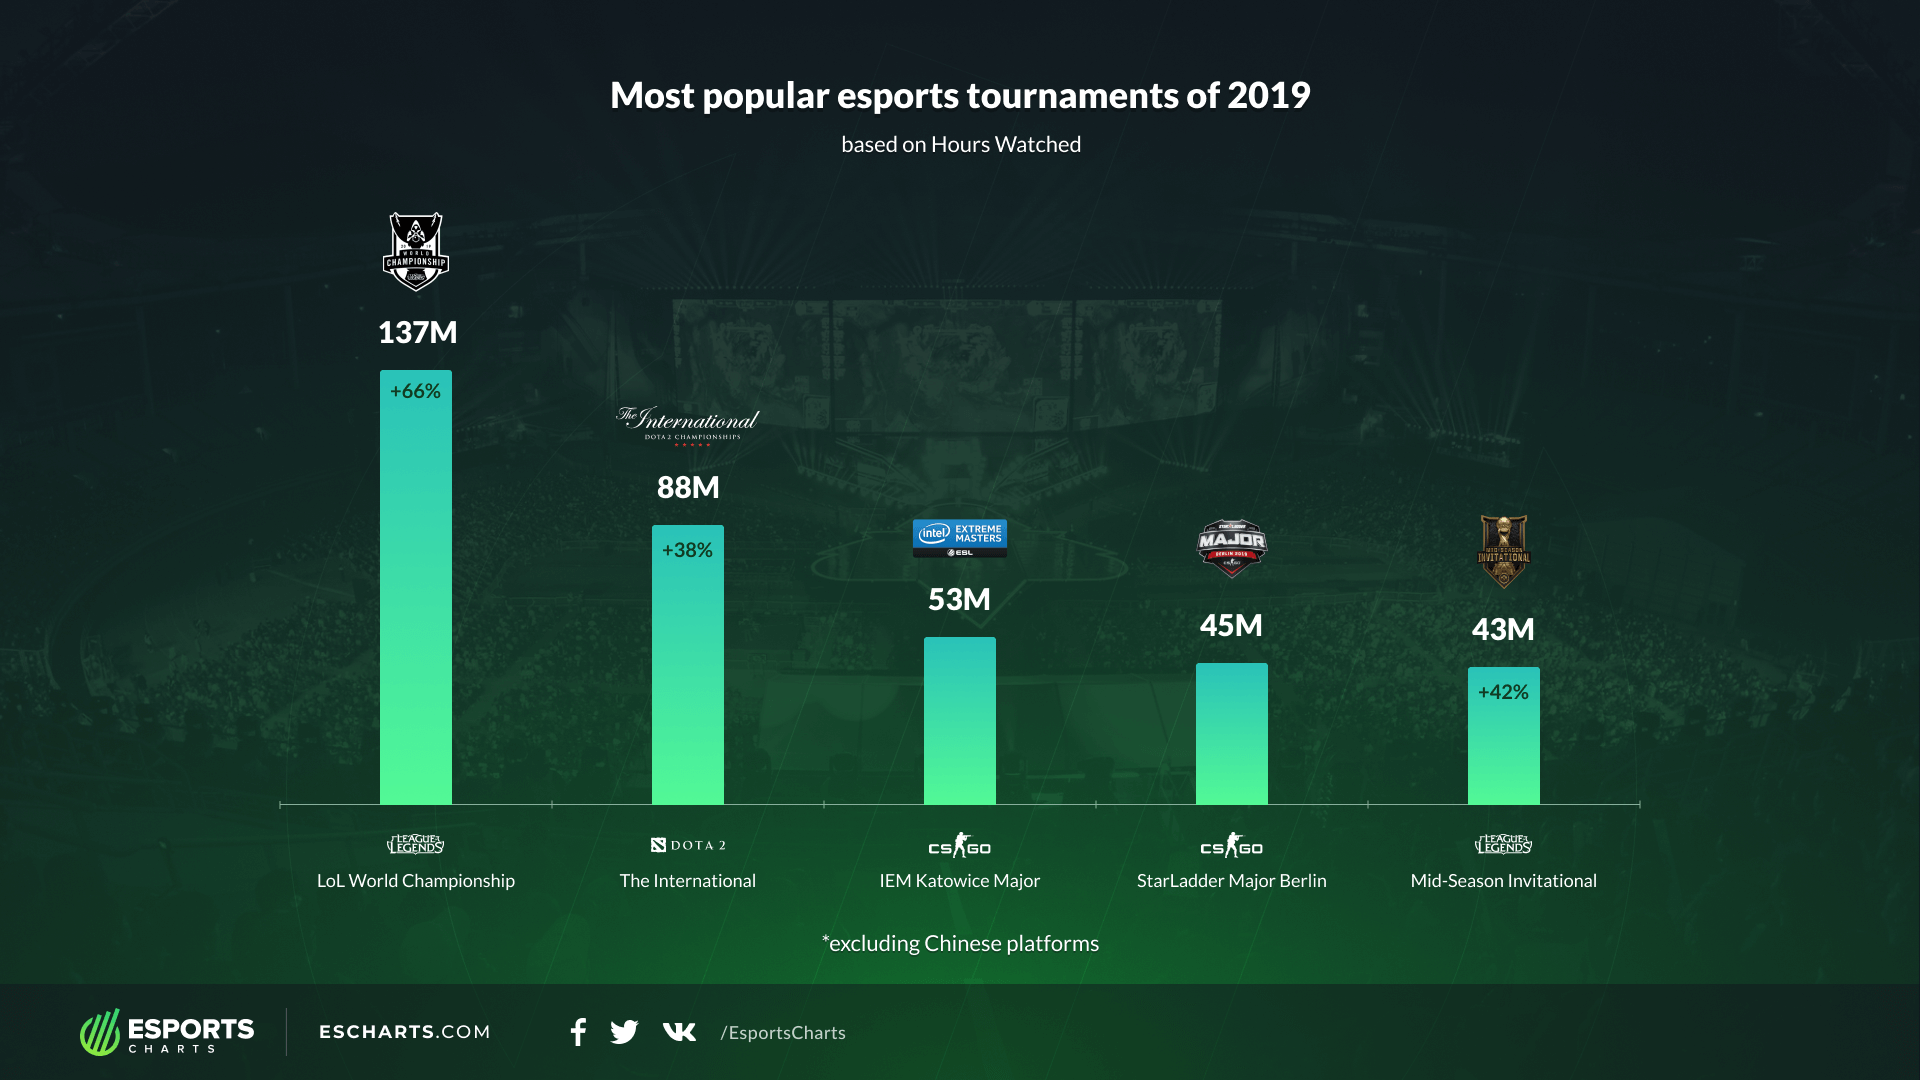 2019 Events by Most Hours Watched